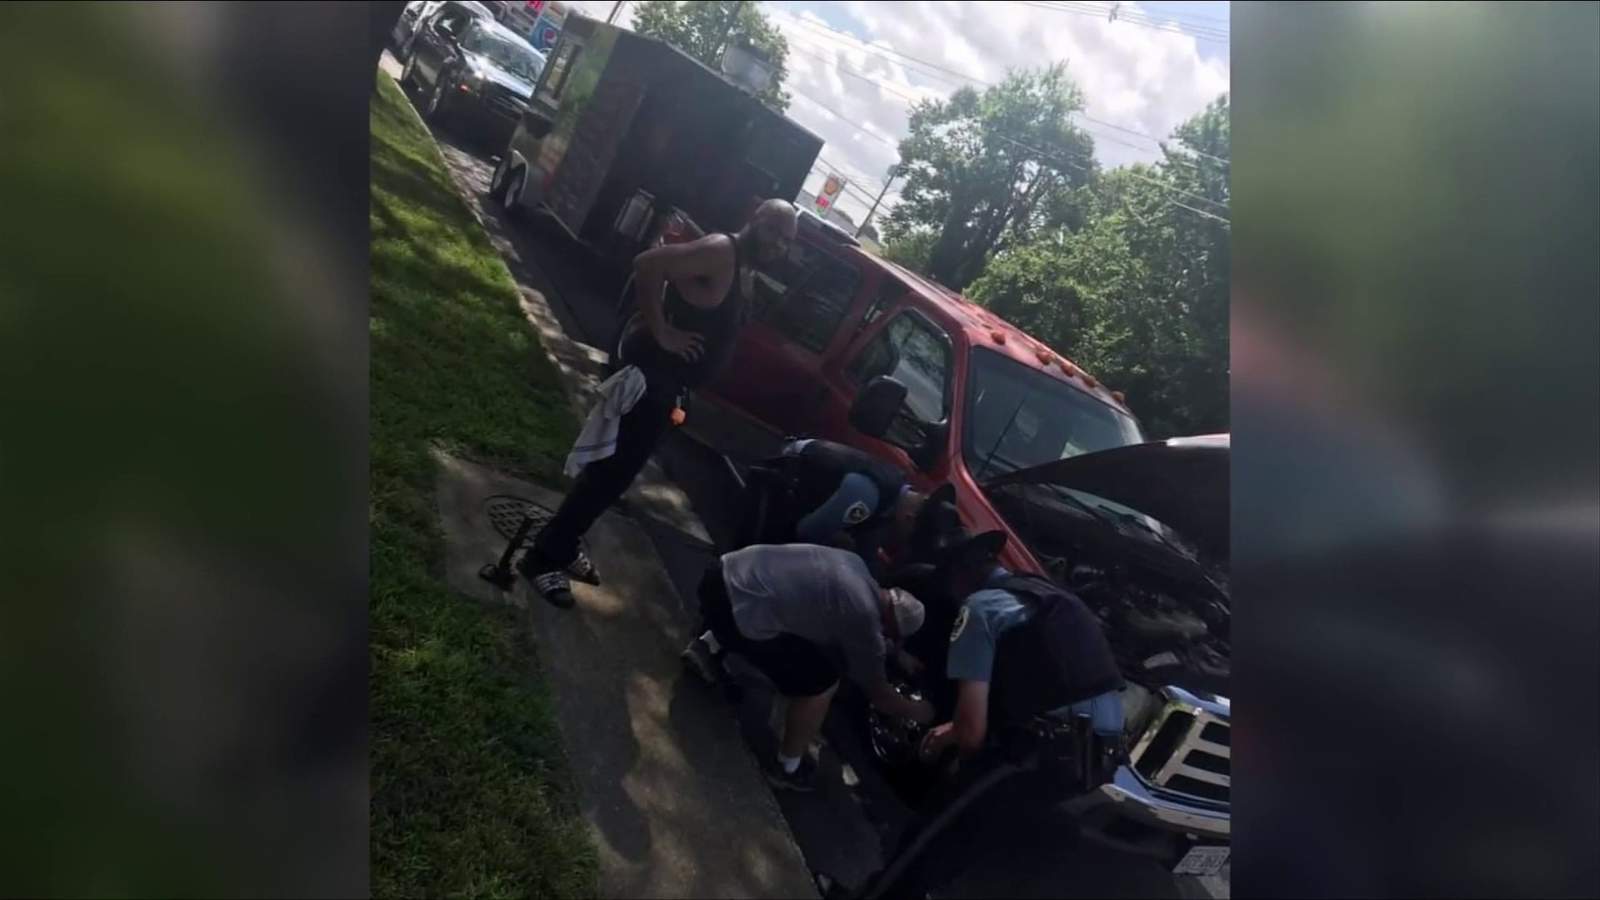 Act of kindness: Salem officers change local business owner’s flat tire